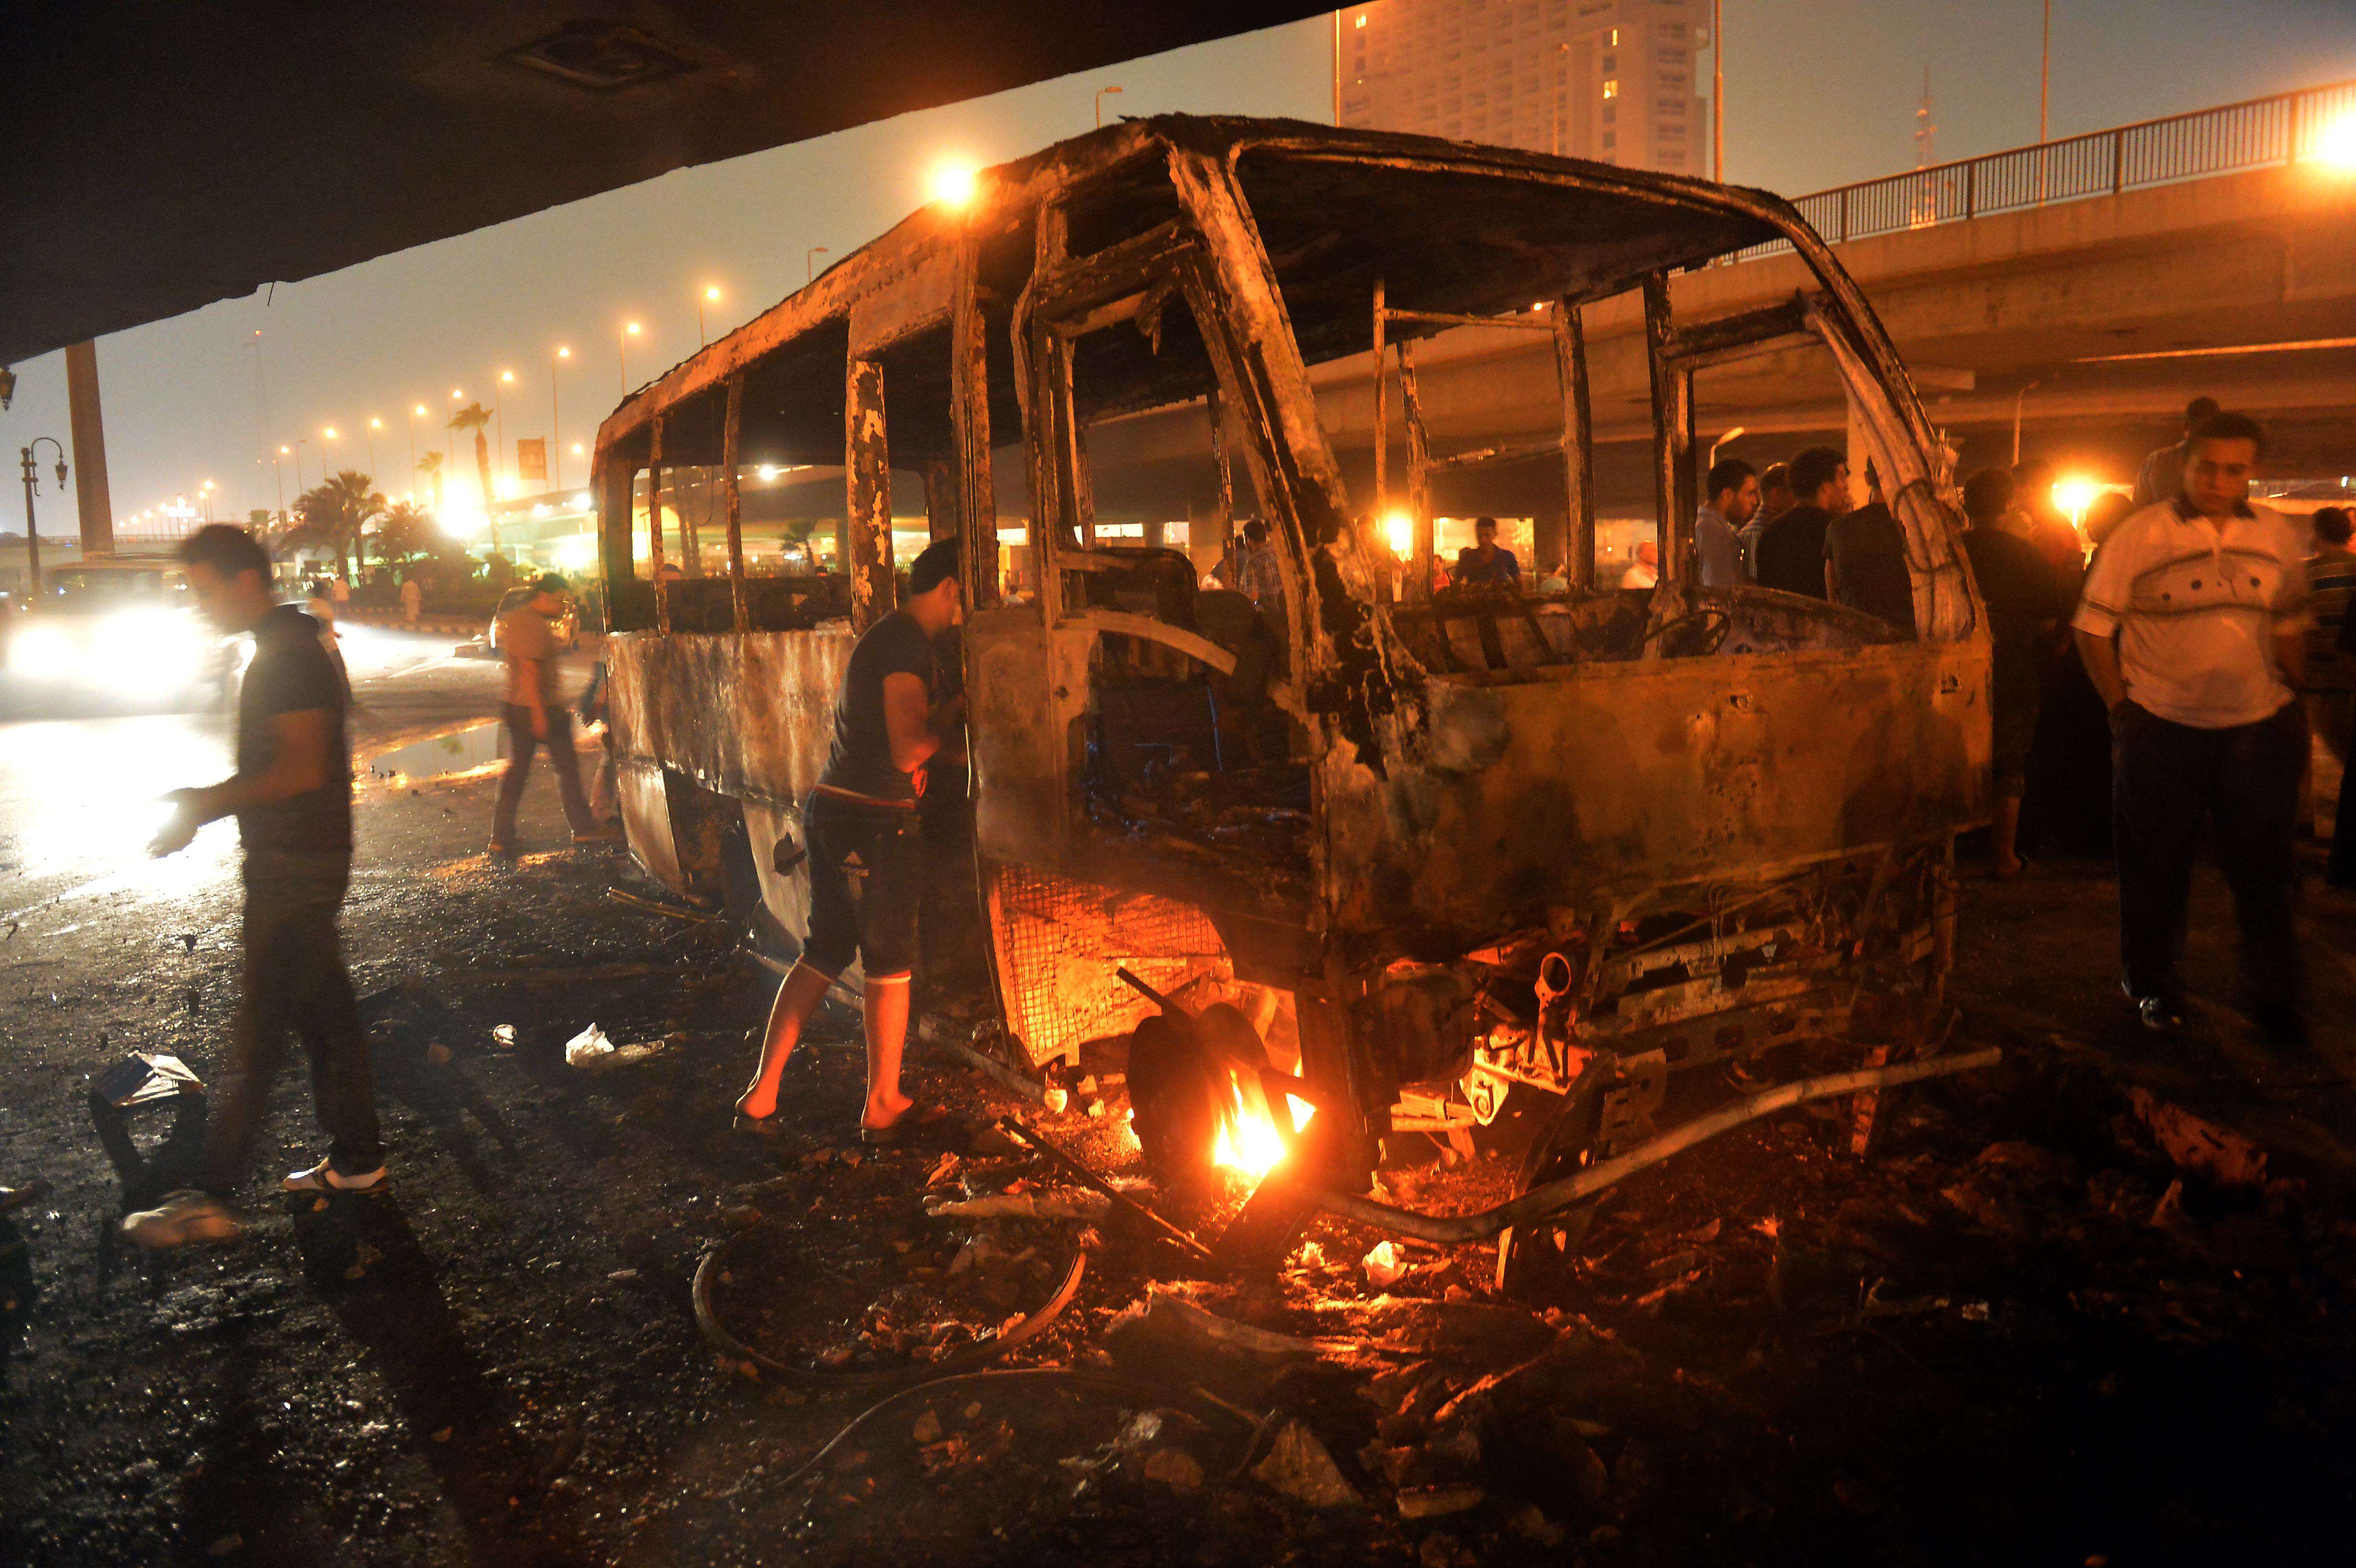 Egyptians inspect a burnt bus which was set on fire during clashes between government supporters and opponents of the Muslim Brotherhood and President Mohamed Morsi in Tahrir square in Cairo. (AFP/ KHALED DESOUKI)